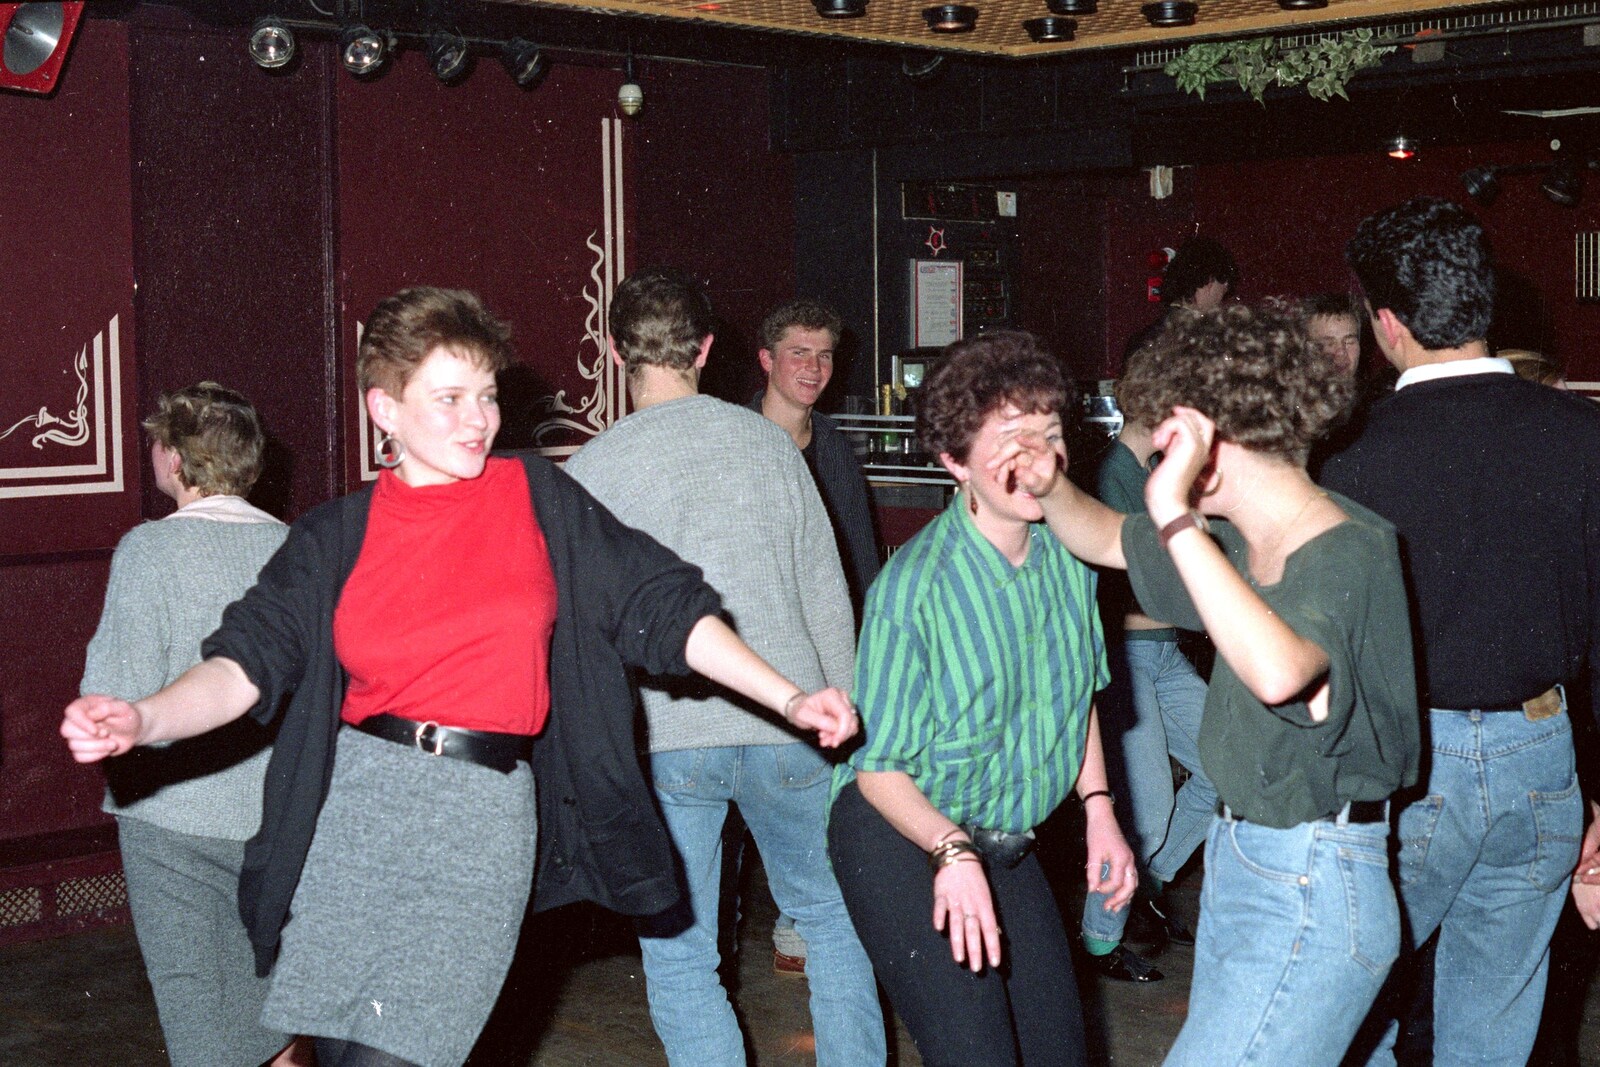 More 80s dancing in Snobs from Uni: A Party in Snobs Nightclub, Mayflower Street, Plymouth - 18th October 1986